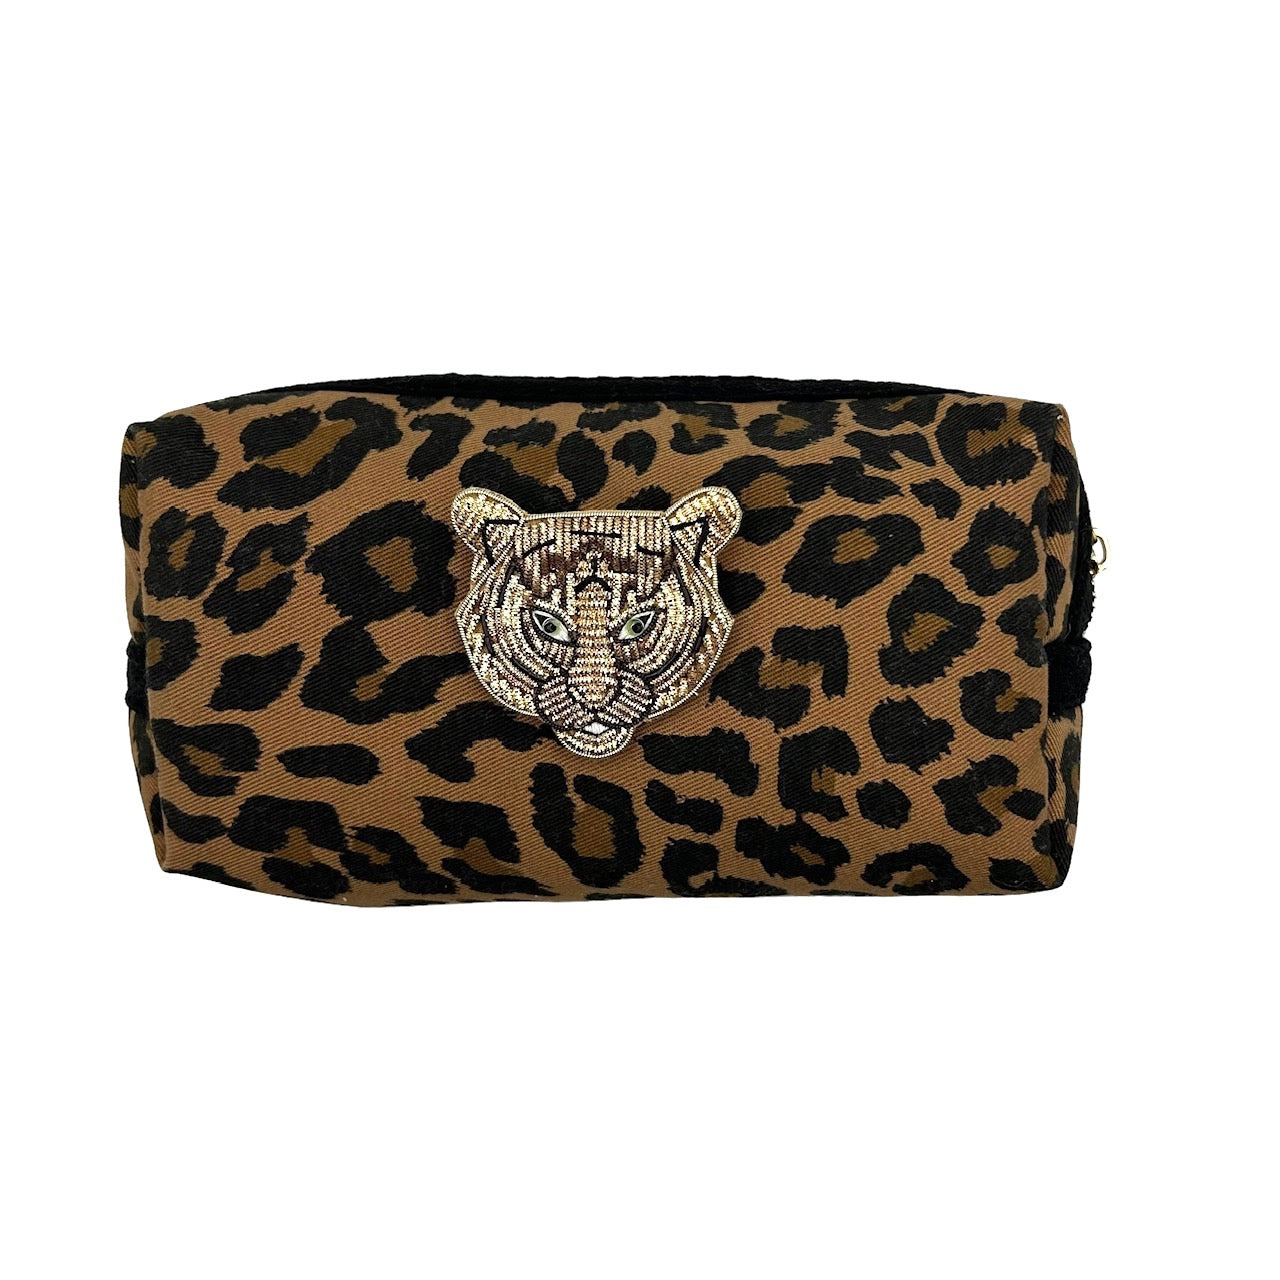 Leopard print make-up bag, large and small, with a  tiger head brooch